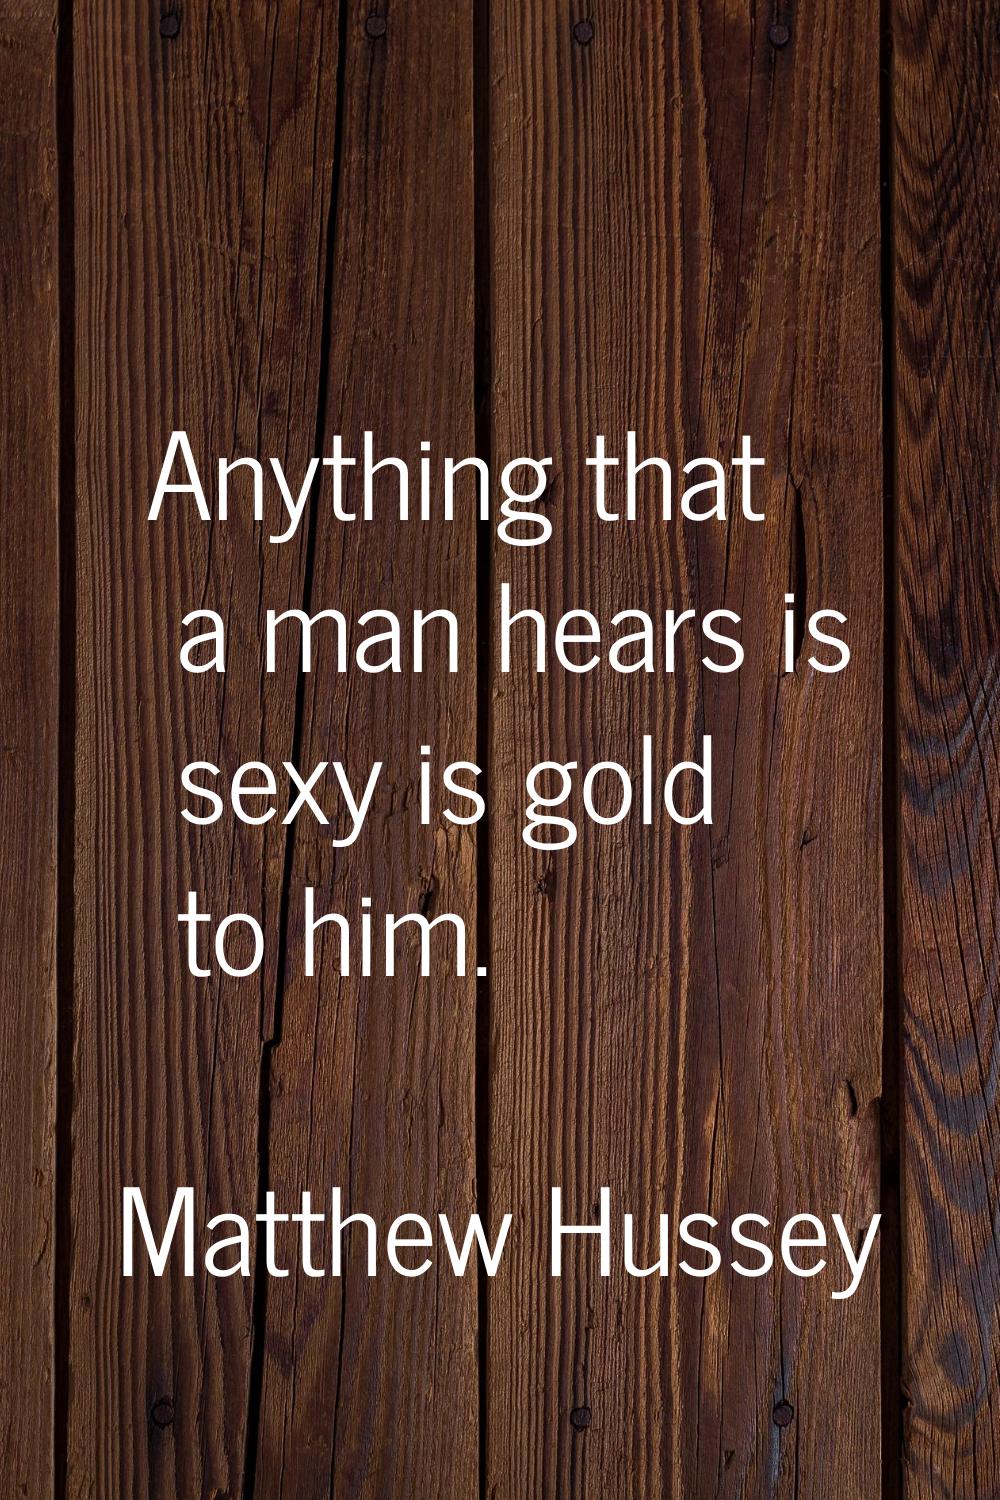 Anything that a man hears is sexy is gold to him.